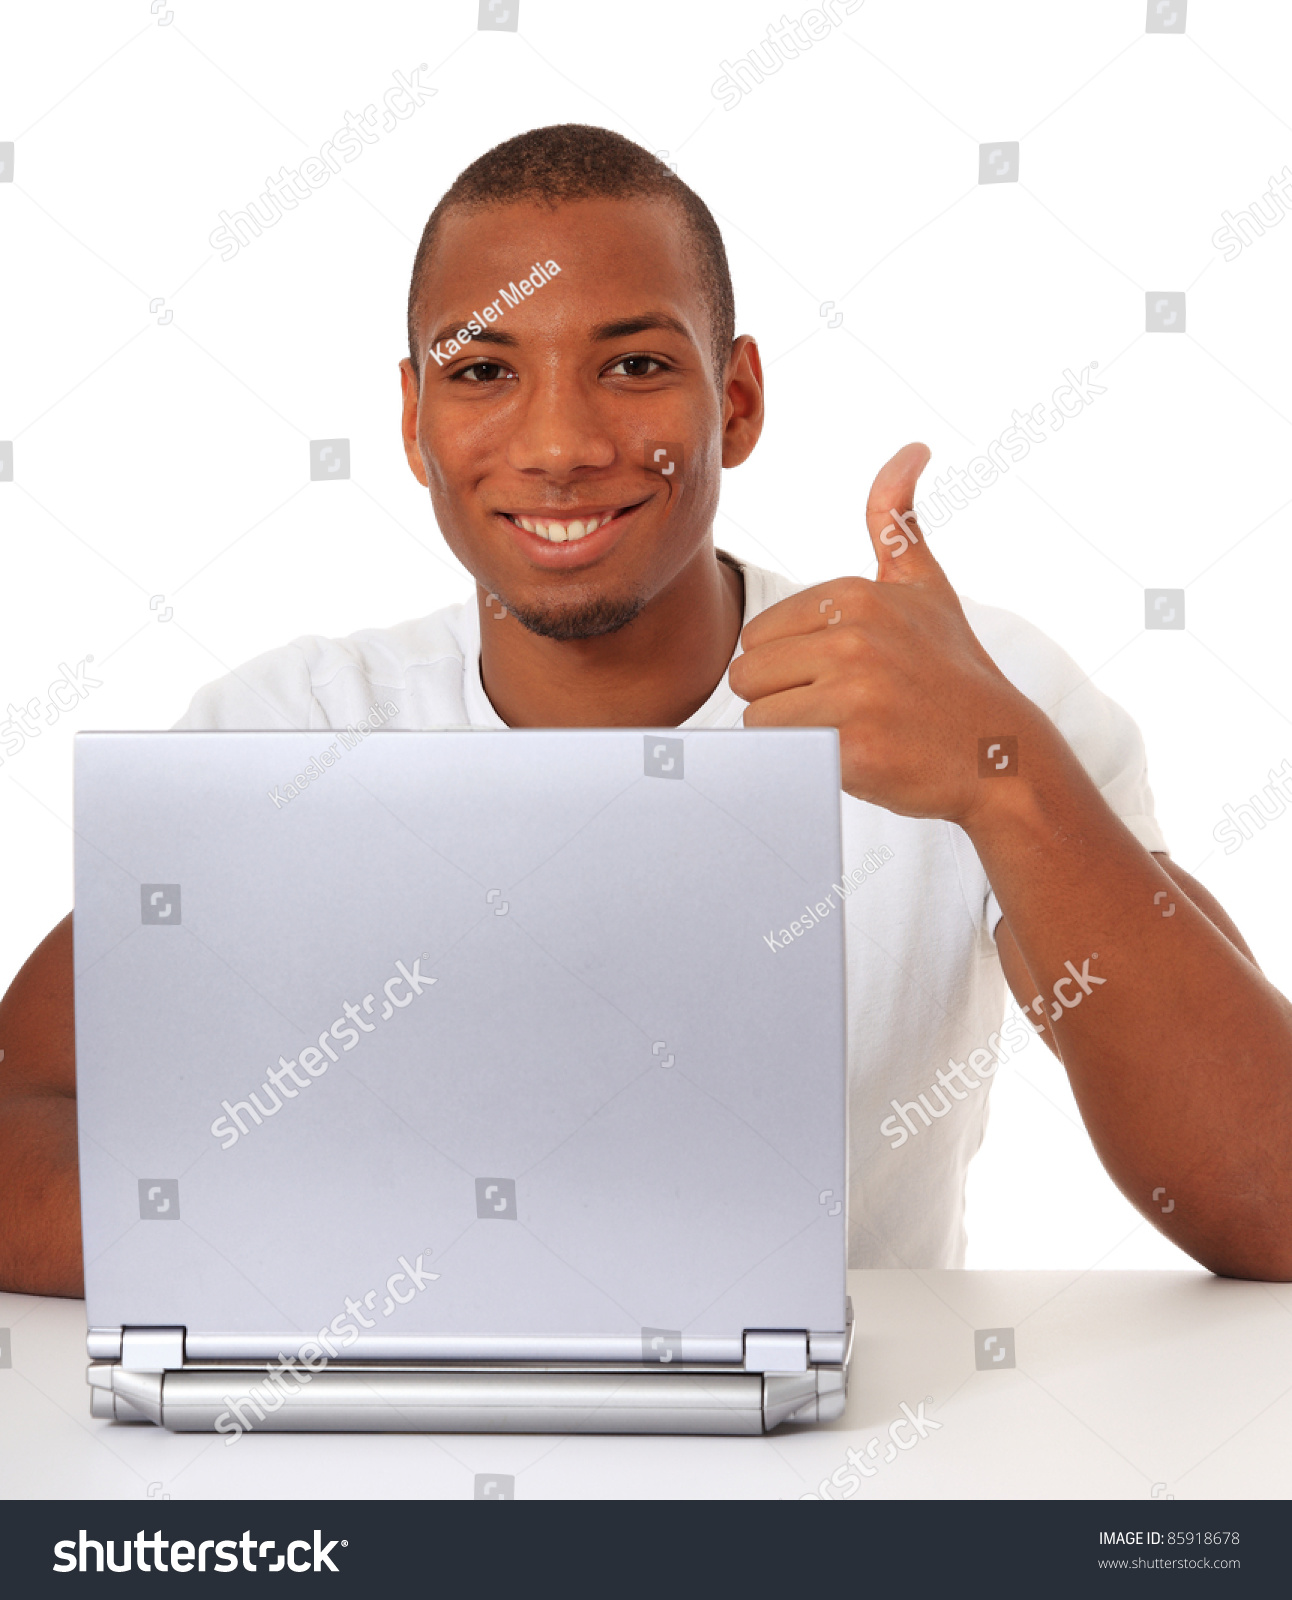 stock-photo-attractive-black-guy-showing